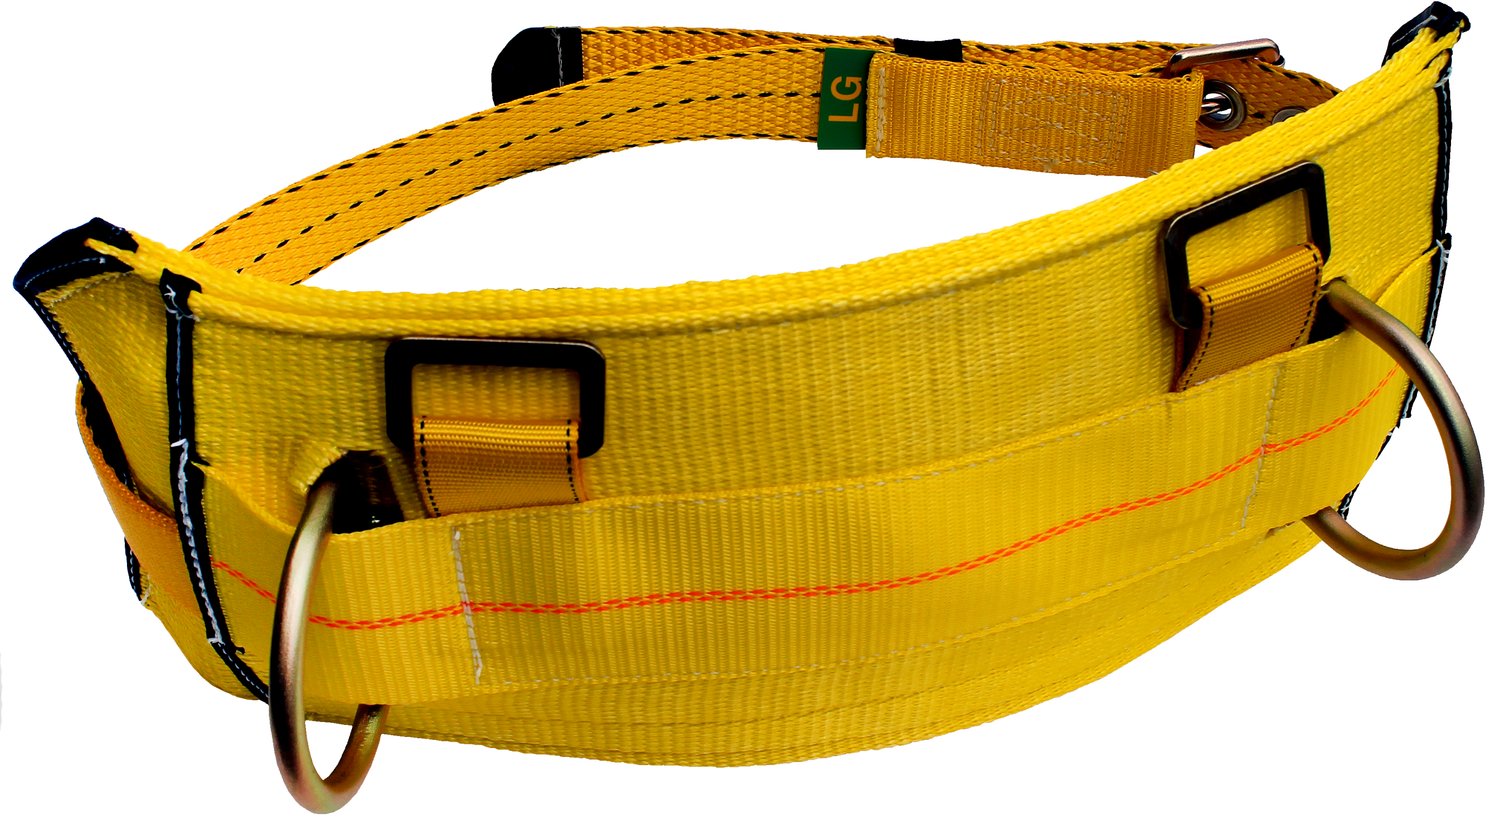 7012693281 - 3M DBI-SALA Derrick Tongue Buckle Positioning Belt with Pass-Thru Harness Connector 1000545, Yellow, X-Large